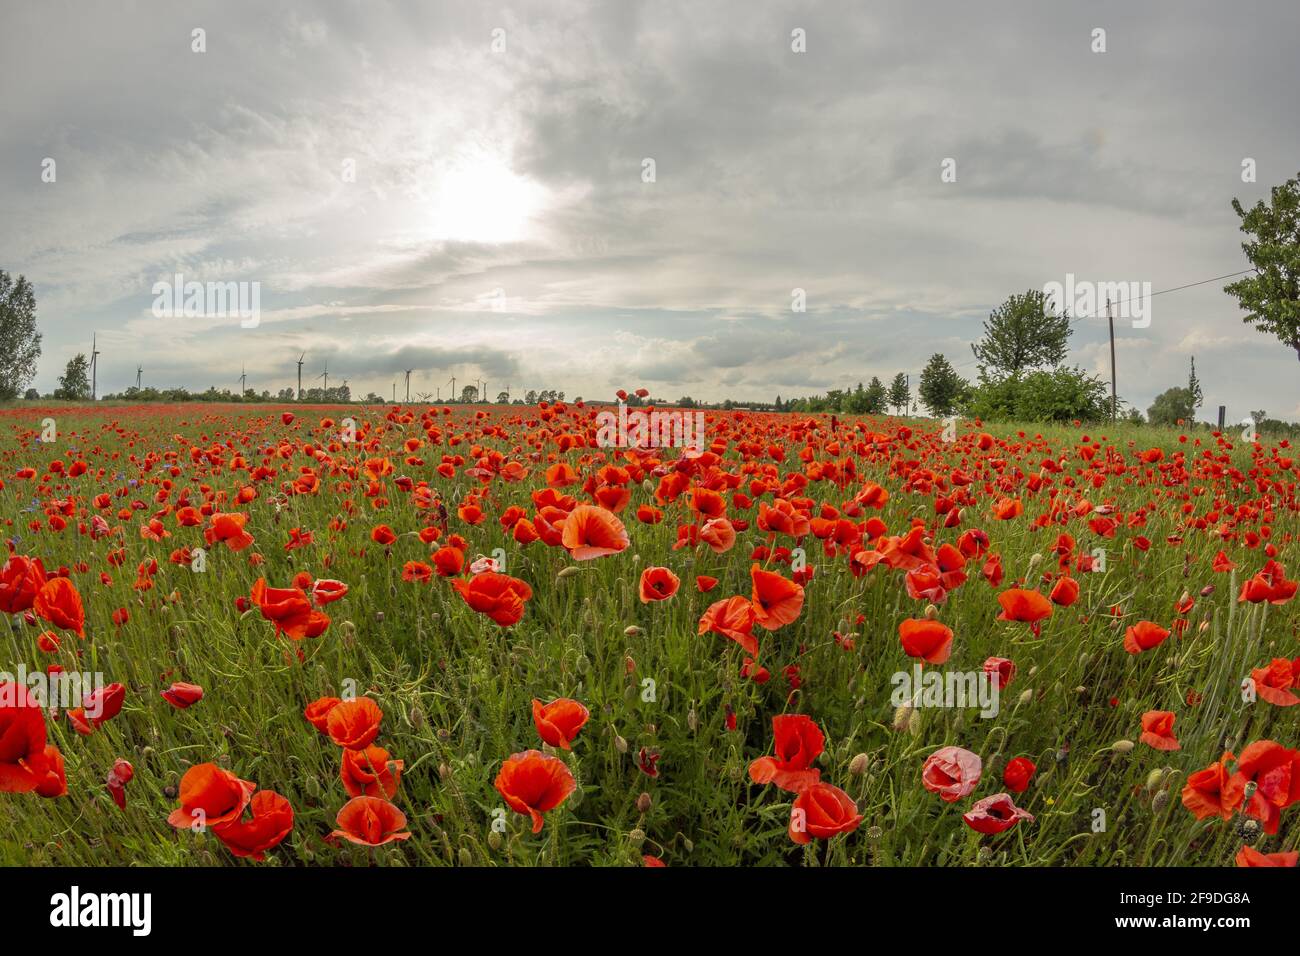 A beautiful view of red poppy flowers growing in the field on a gloomy summer day Stock Photo